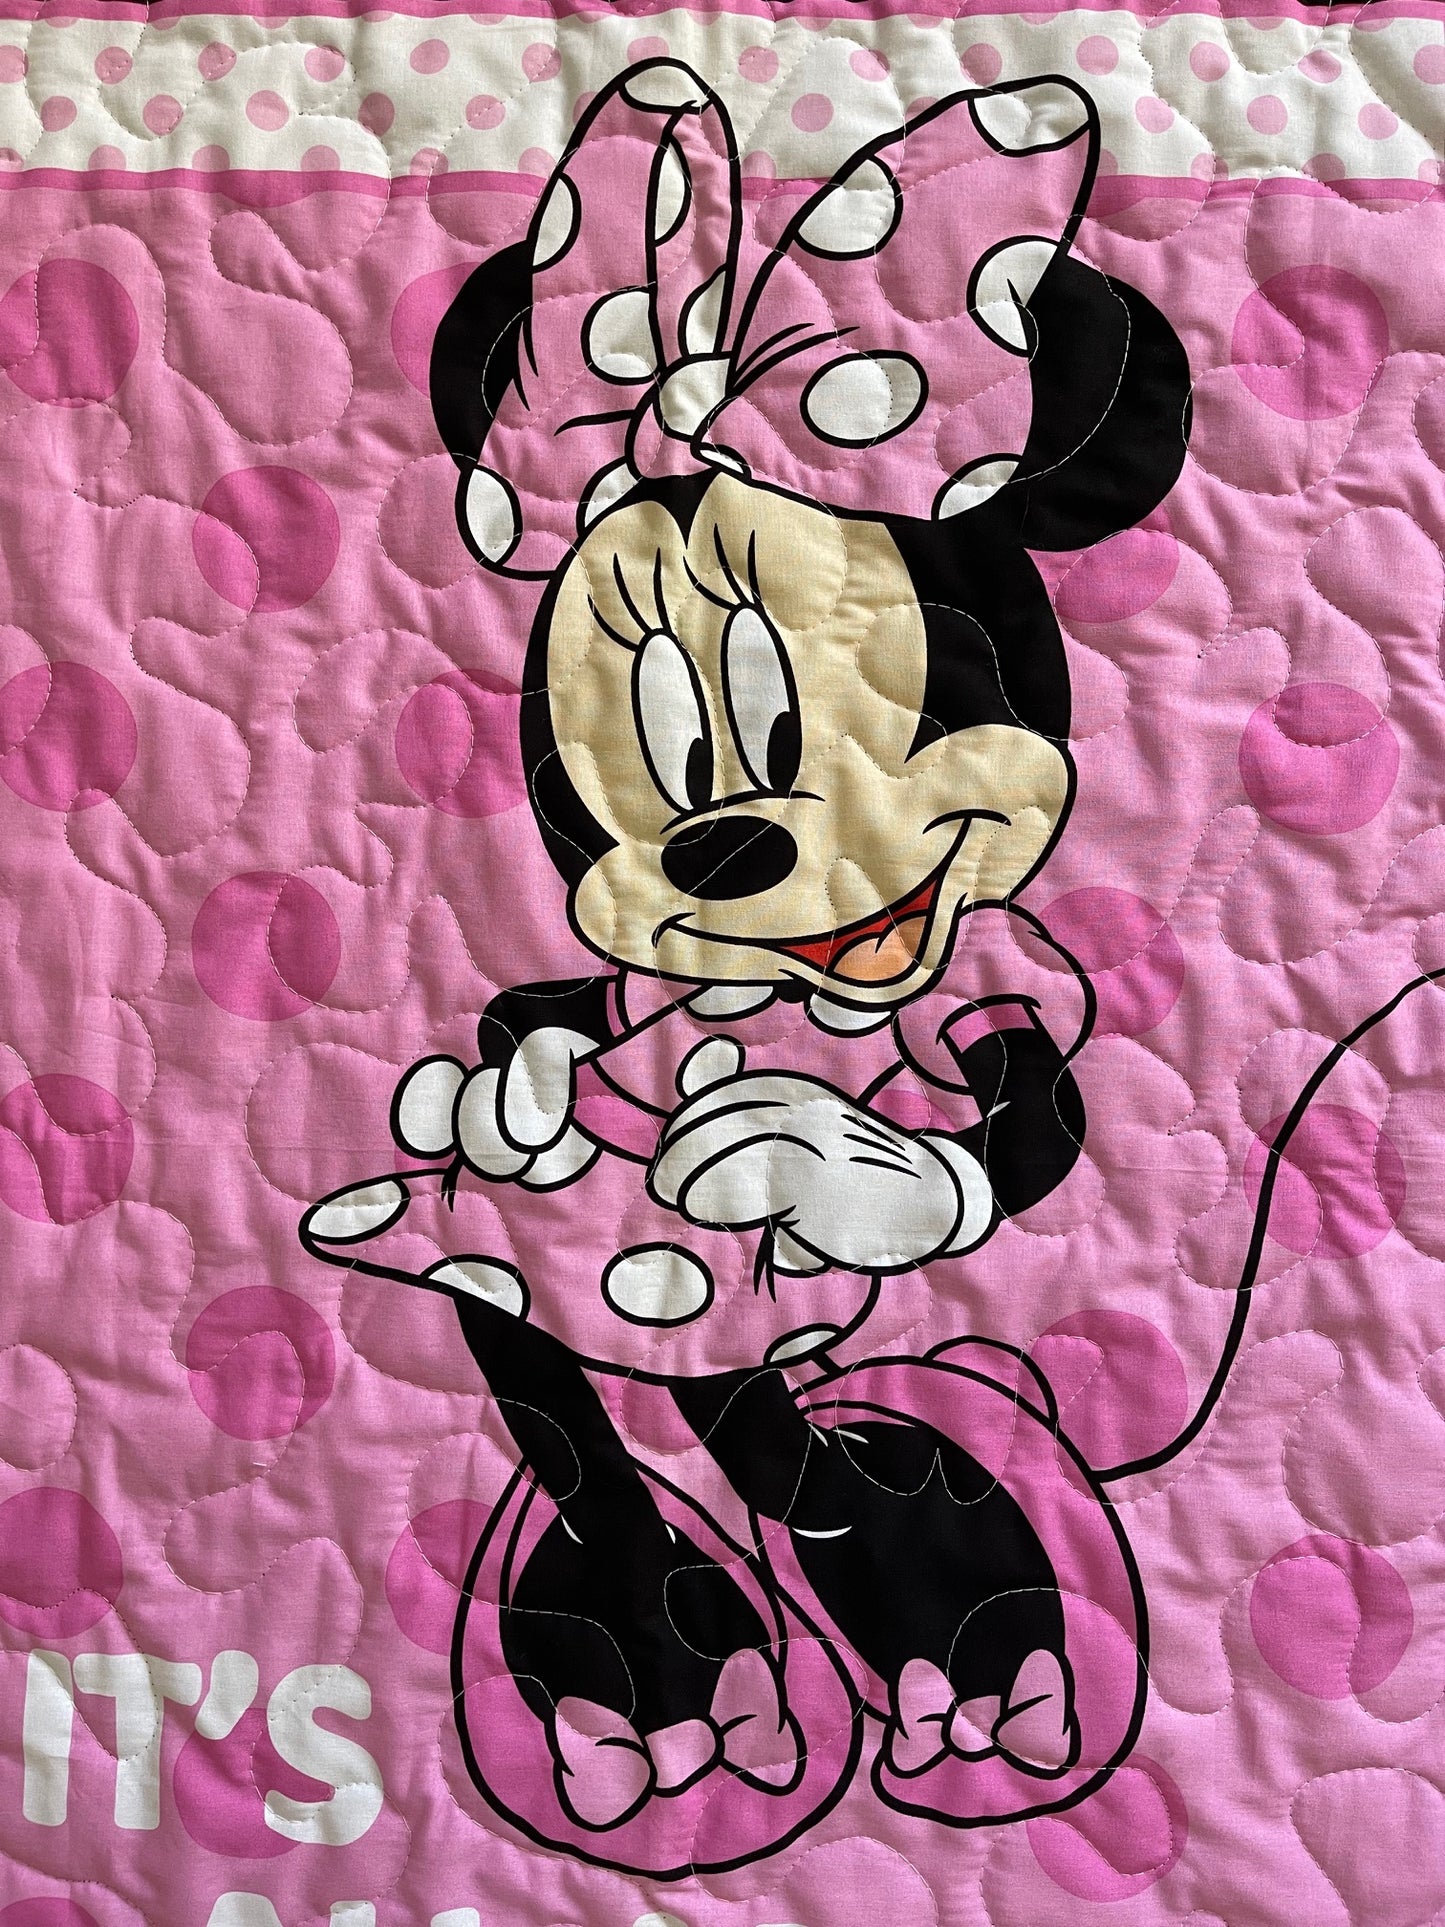 MINNIE MOUSE "IT'S ALL ABOUT MINNIE" Inspired Pink Black White Quilted Blanket